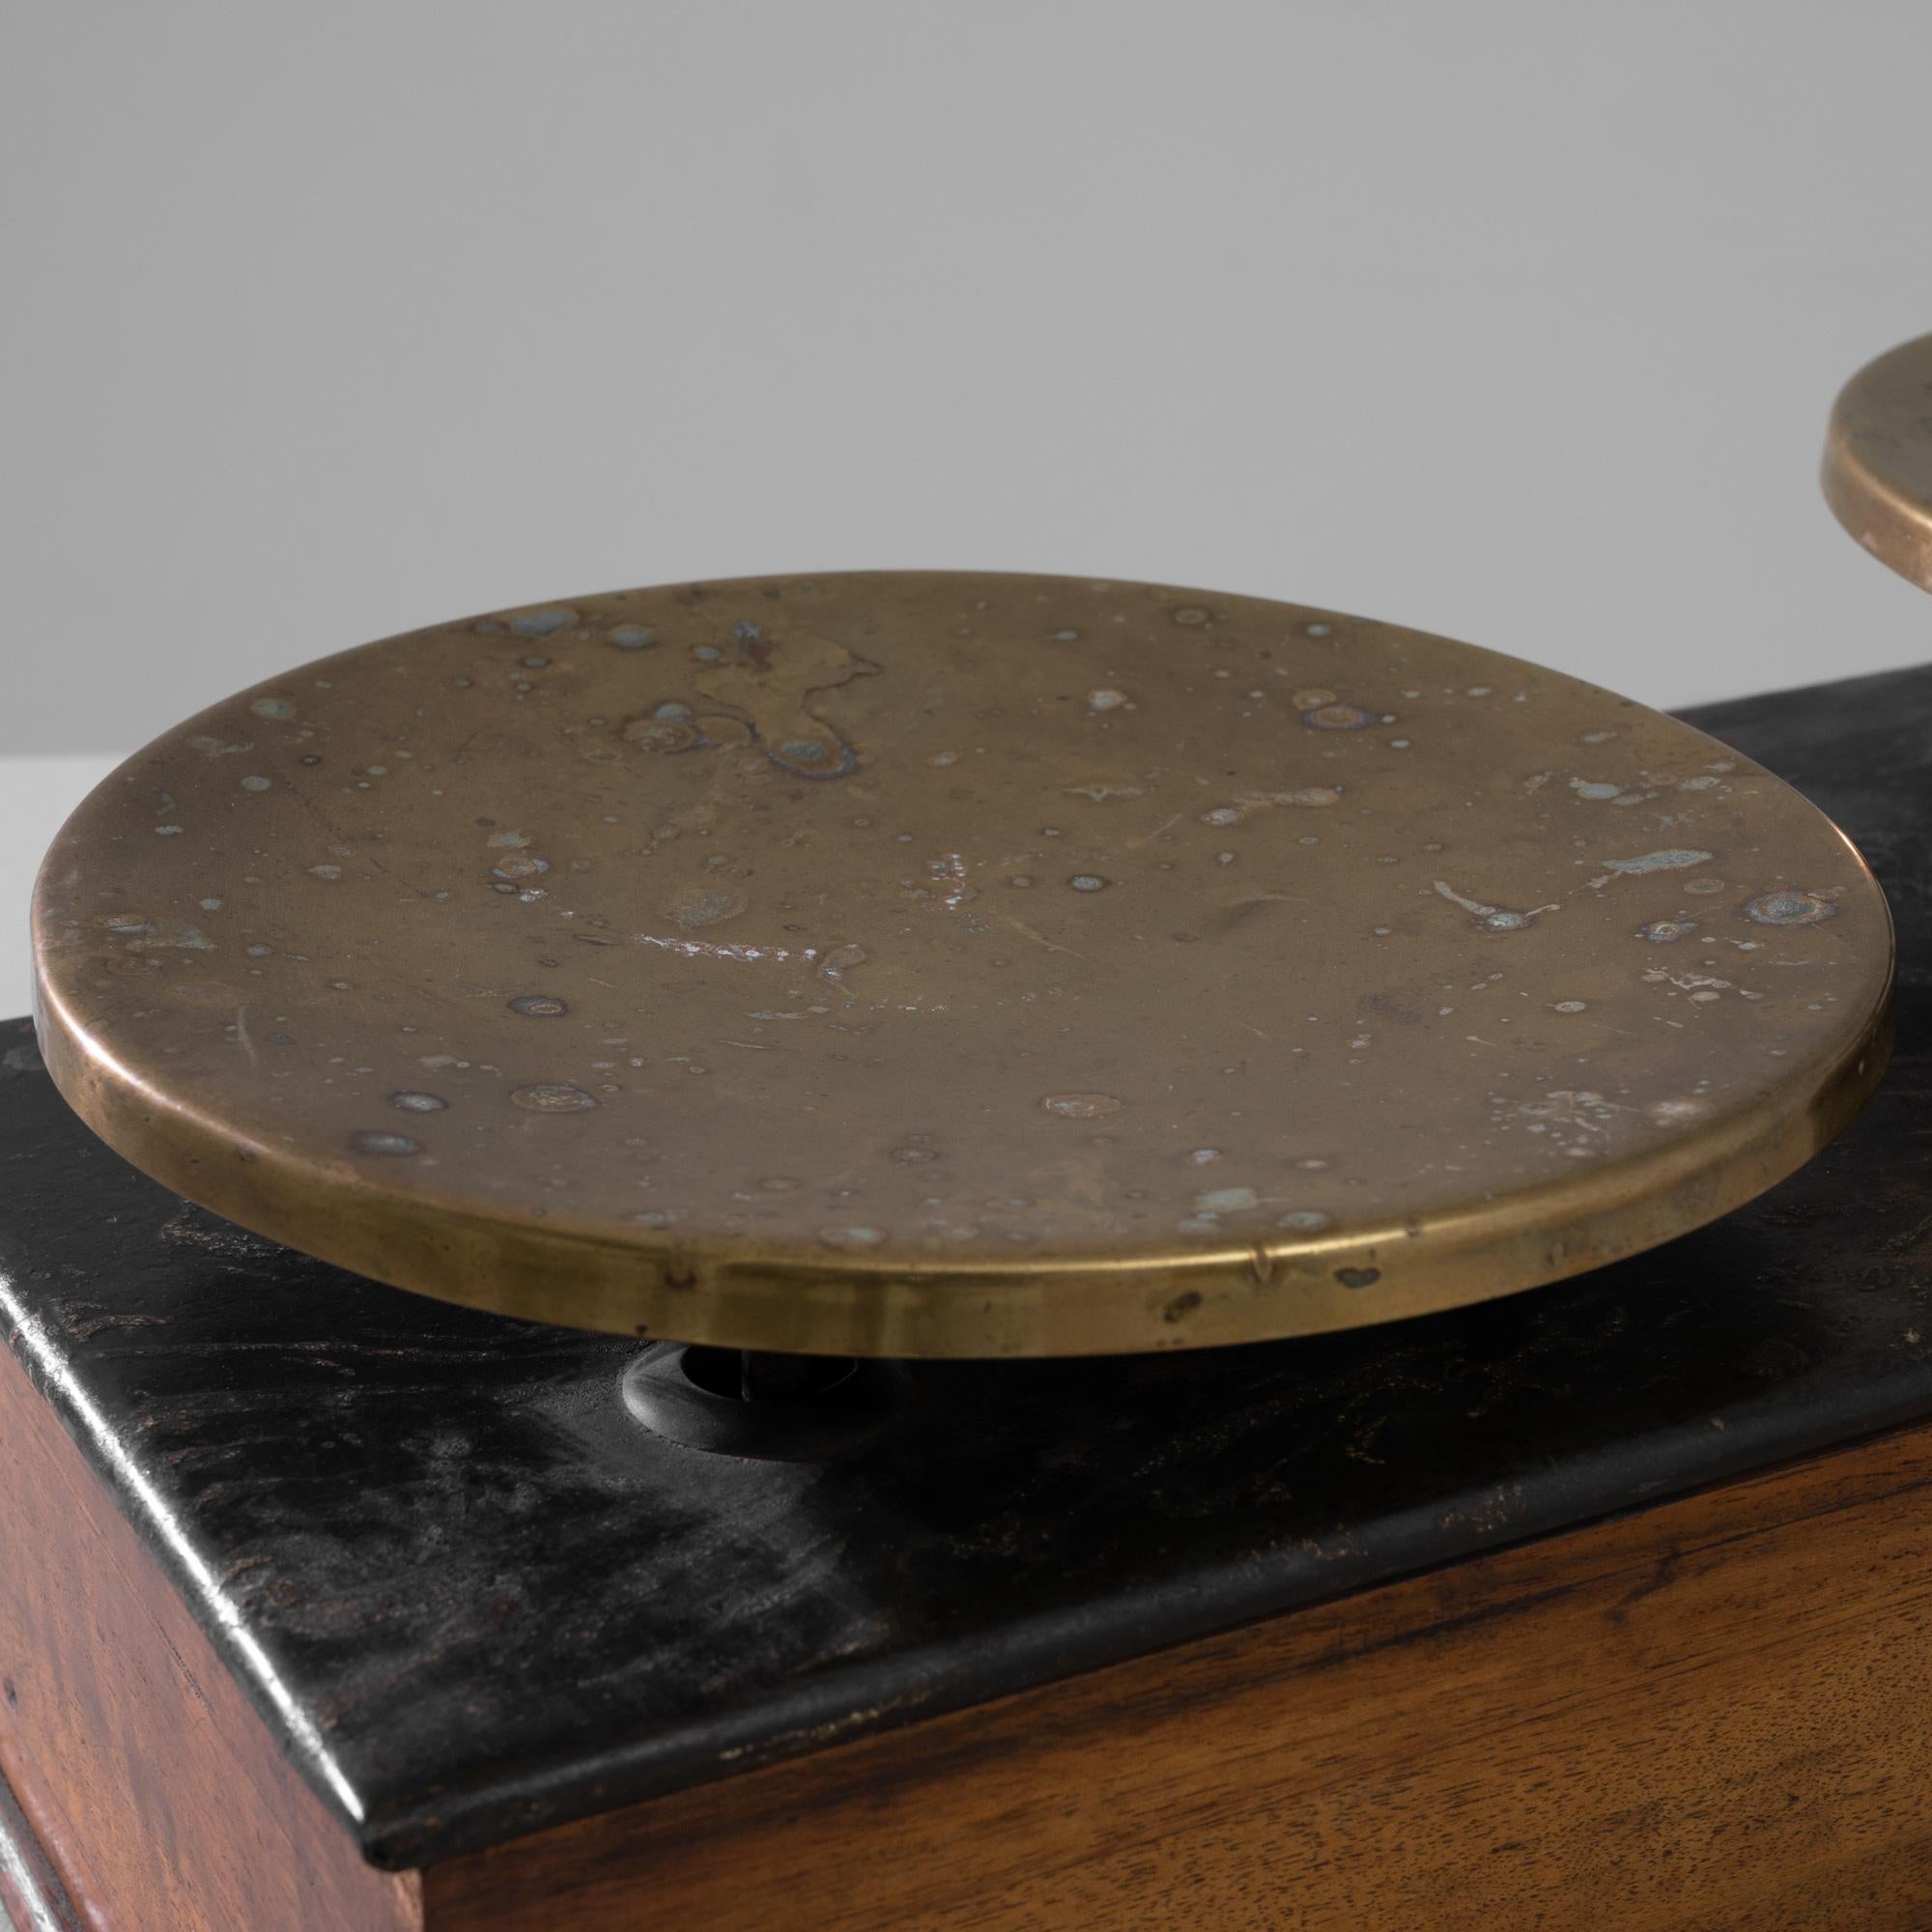 A 19th century metal and wooden scale produced in France, this piece embodies the savoir-faire of its manufacturer, Maison Béranger. A rectangular wooden case covered with a black metal top supports two oxidized copper trays showcasing delicate